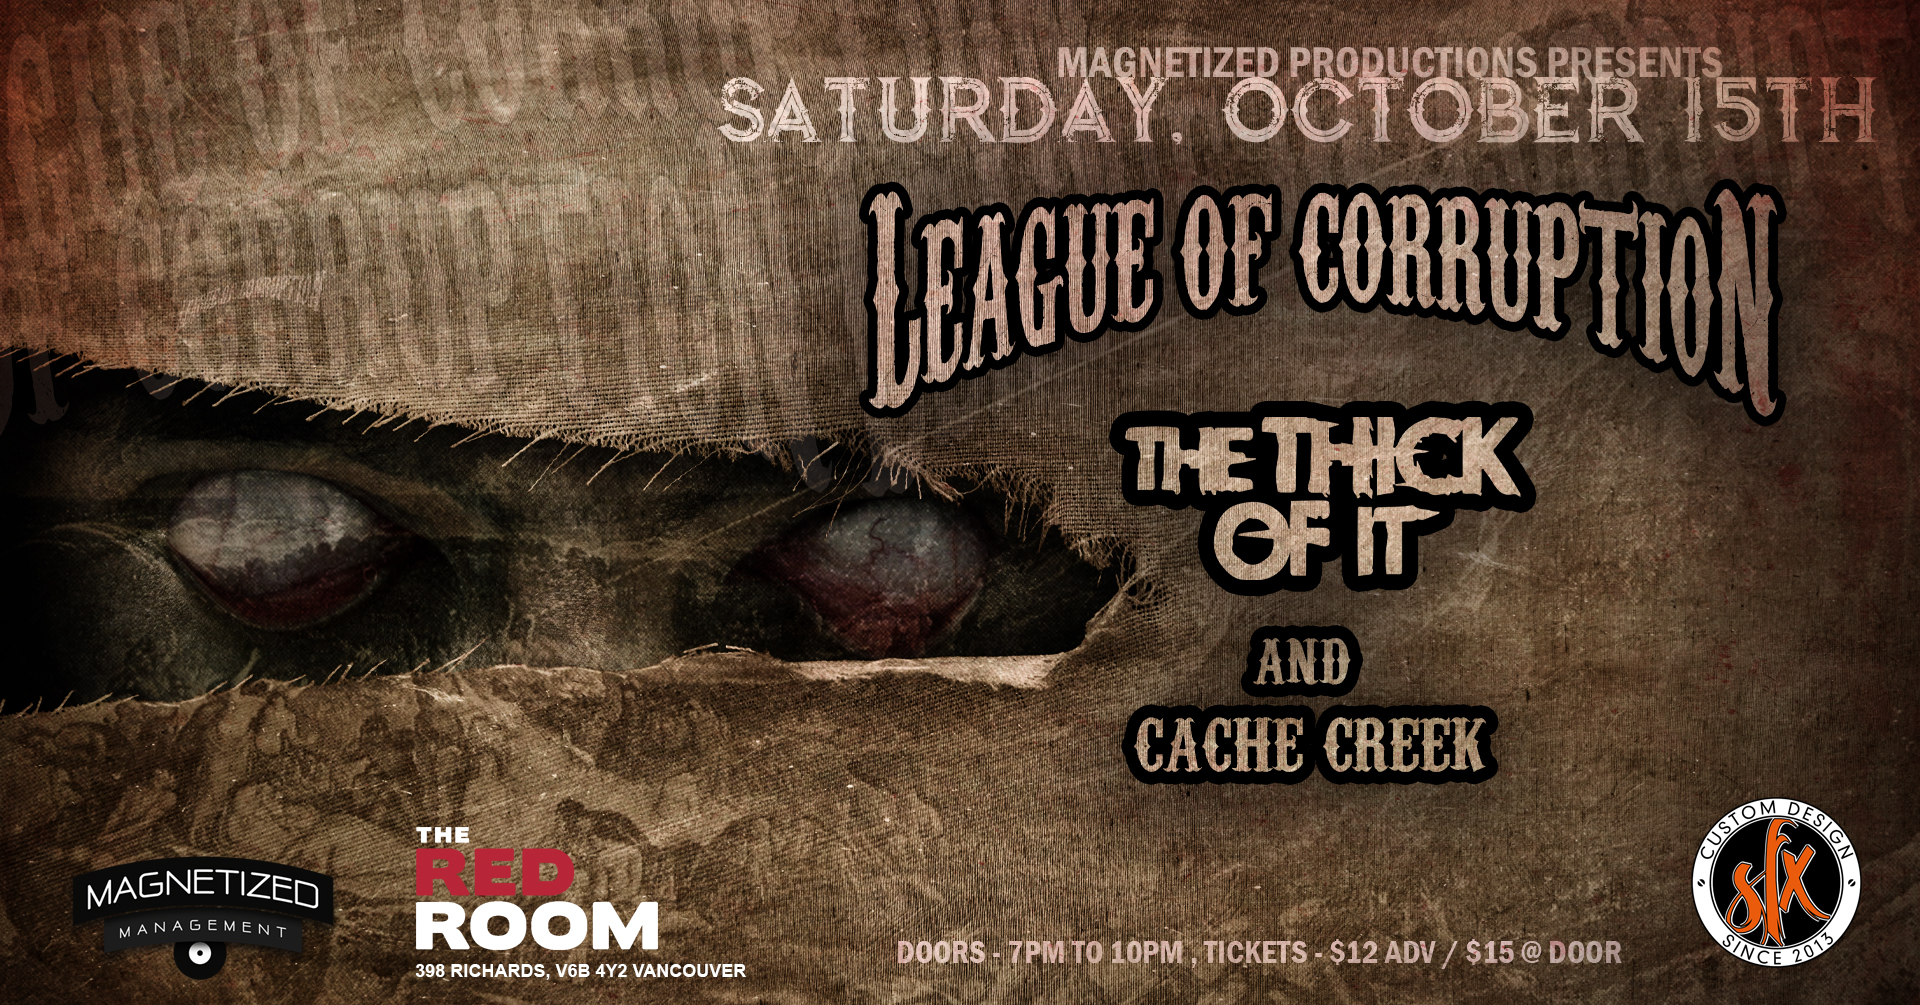 League of Corruption w/The Thick of IT and Cache Creek